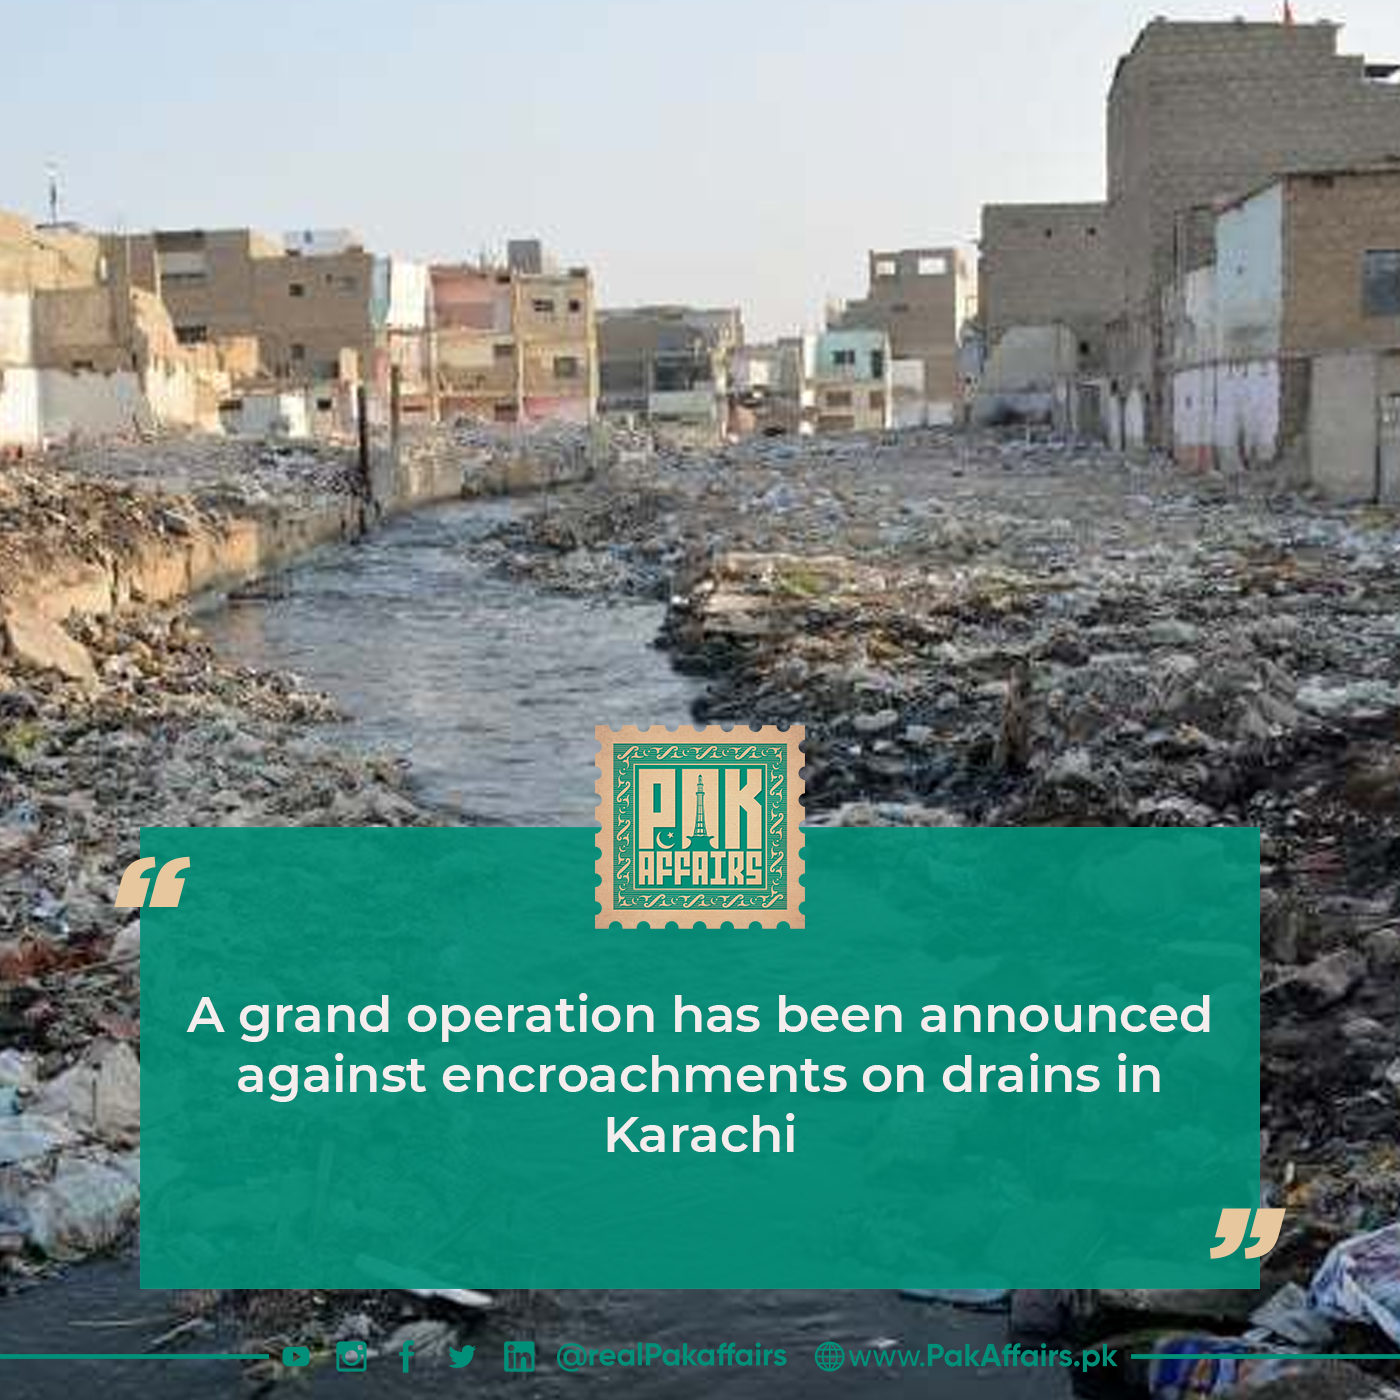 A grand operation has been announced against encroachments on drains in Karachi